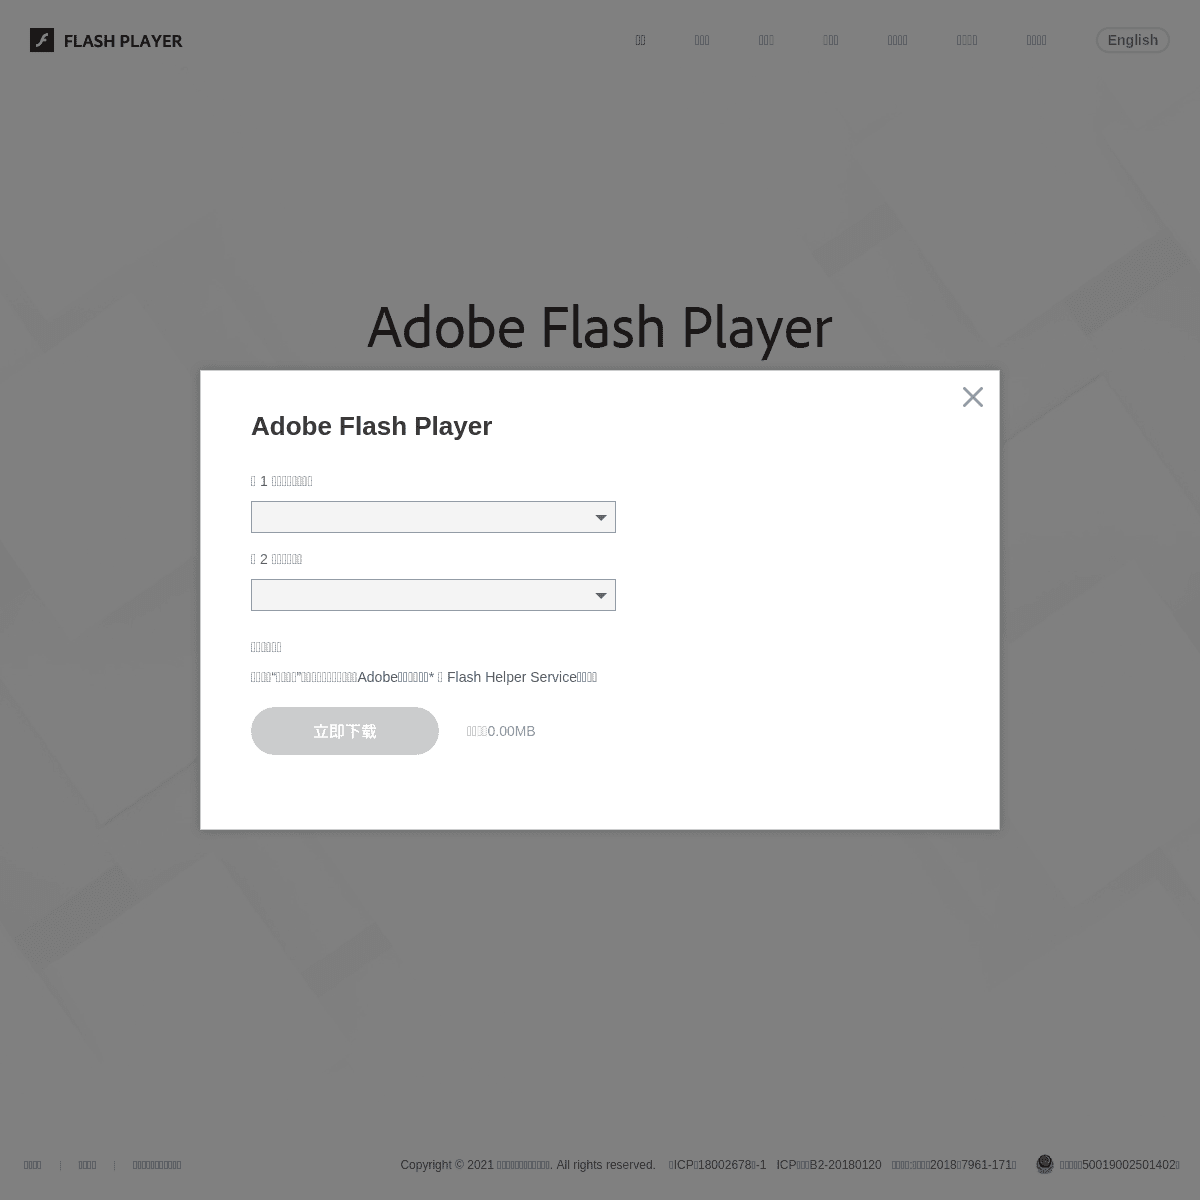 A complete backup of https://flash.cn